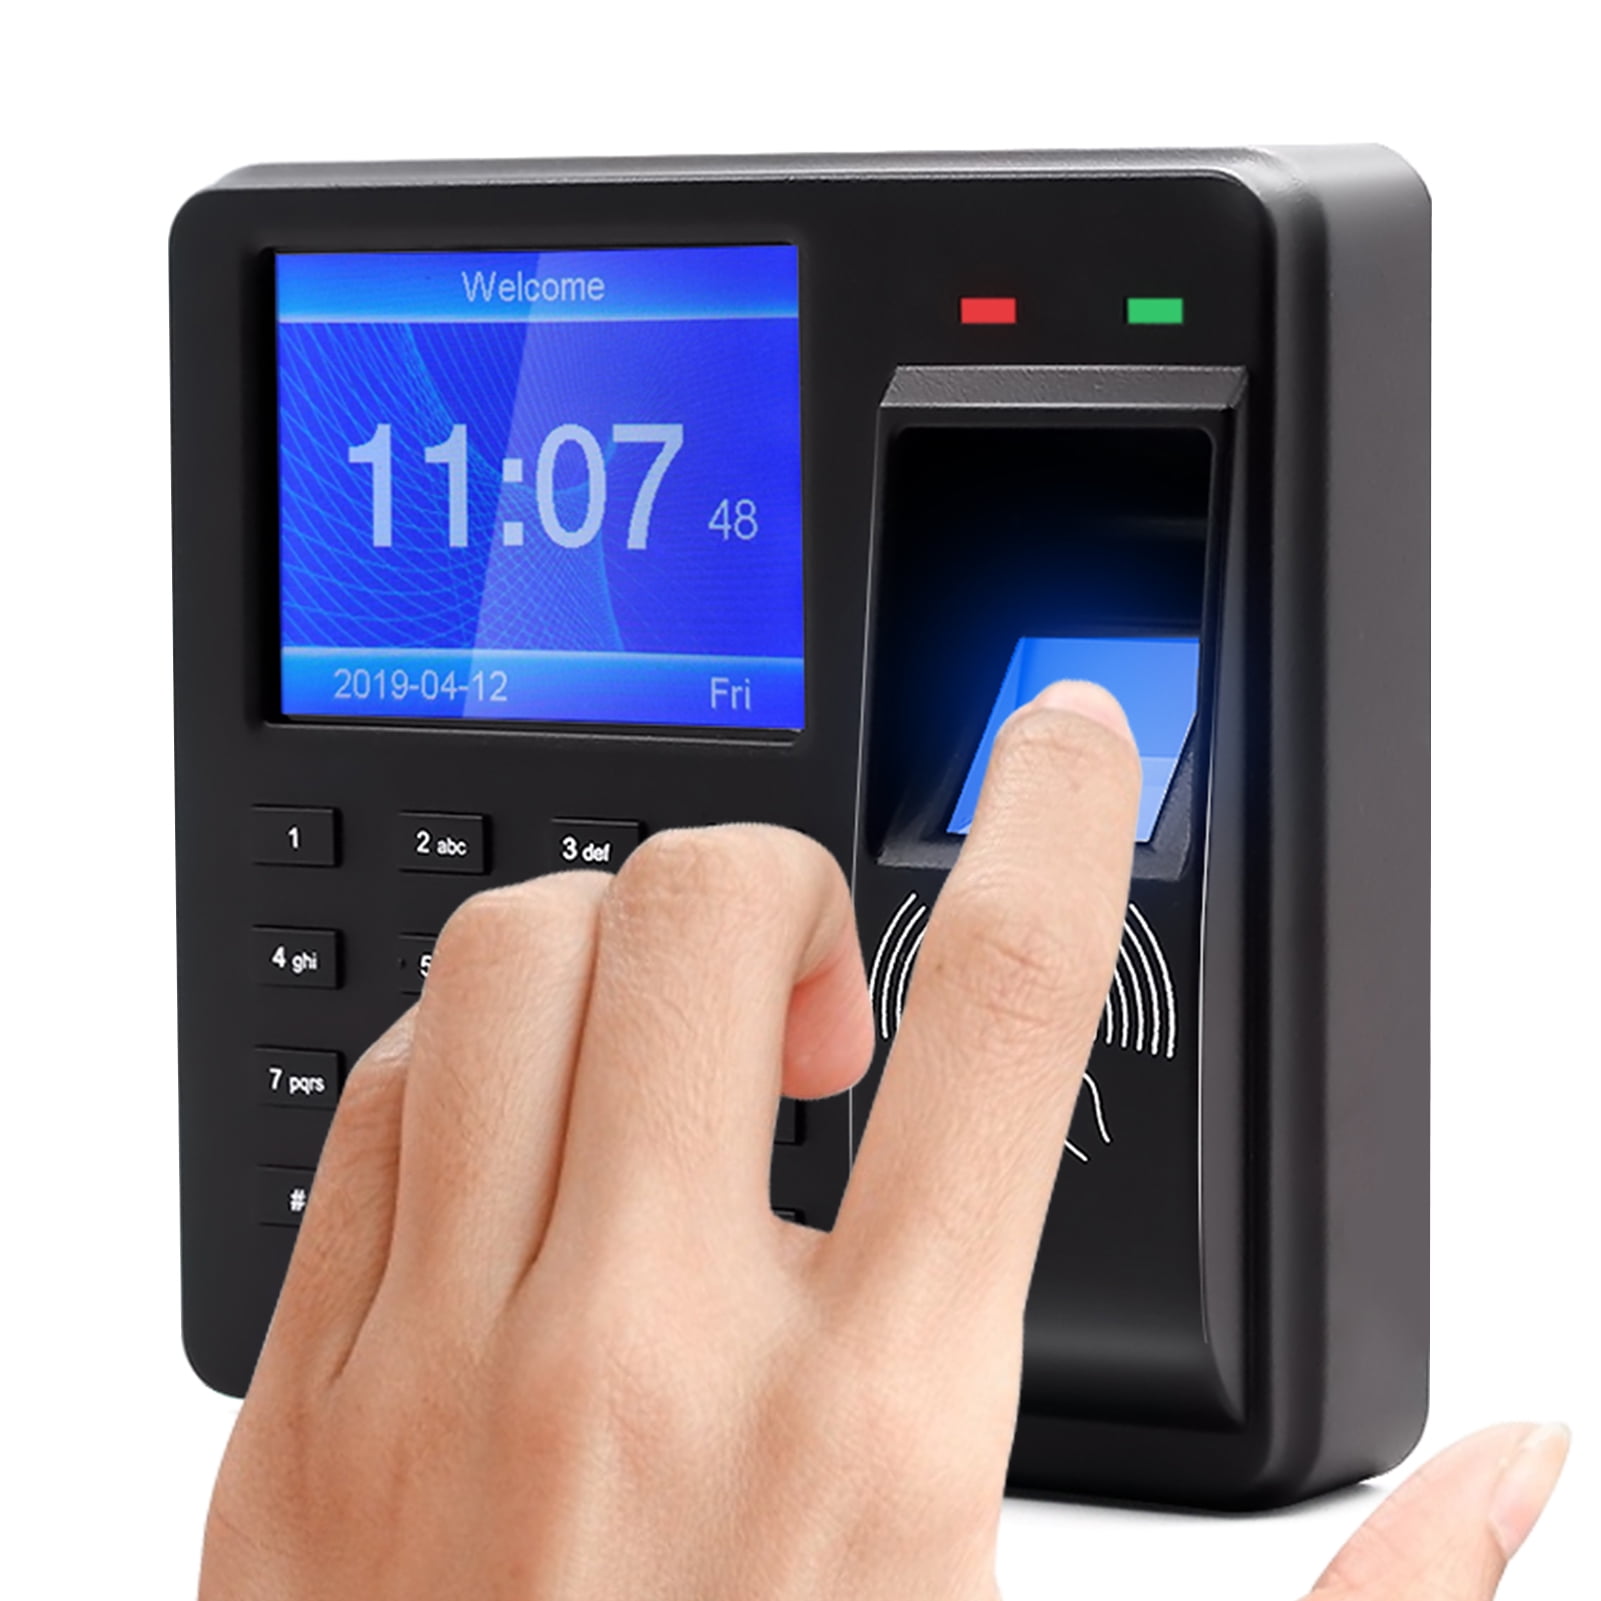 on time attendance software